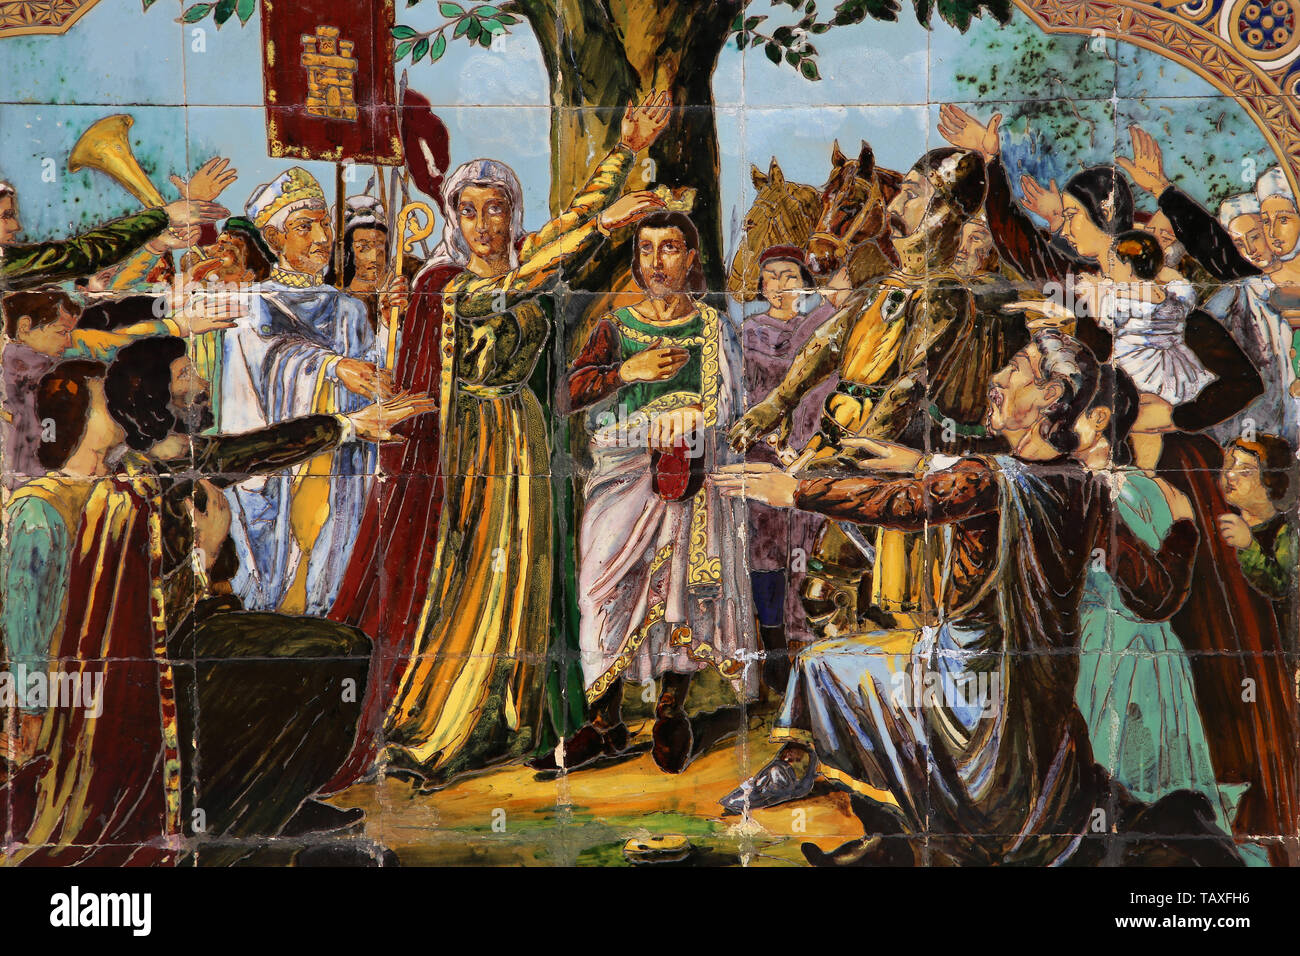 Berengaria (1179-1246) queen of Castile renounces the crown for the benefit of his son, future Fernando III (1199-1252). Seville. Spain. Stock Photo